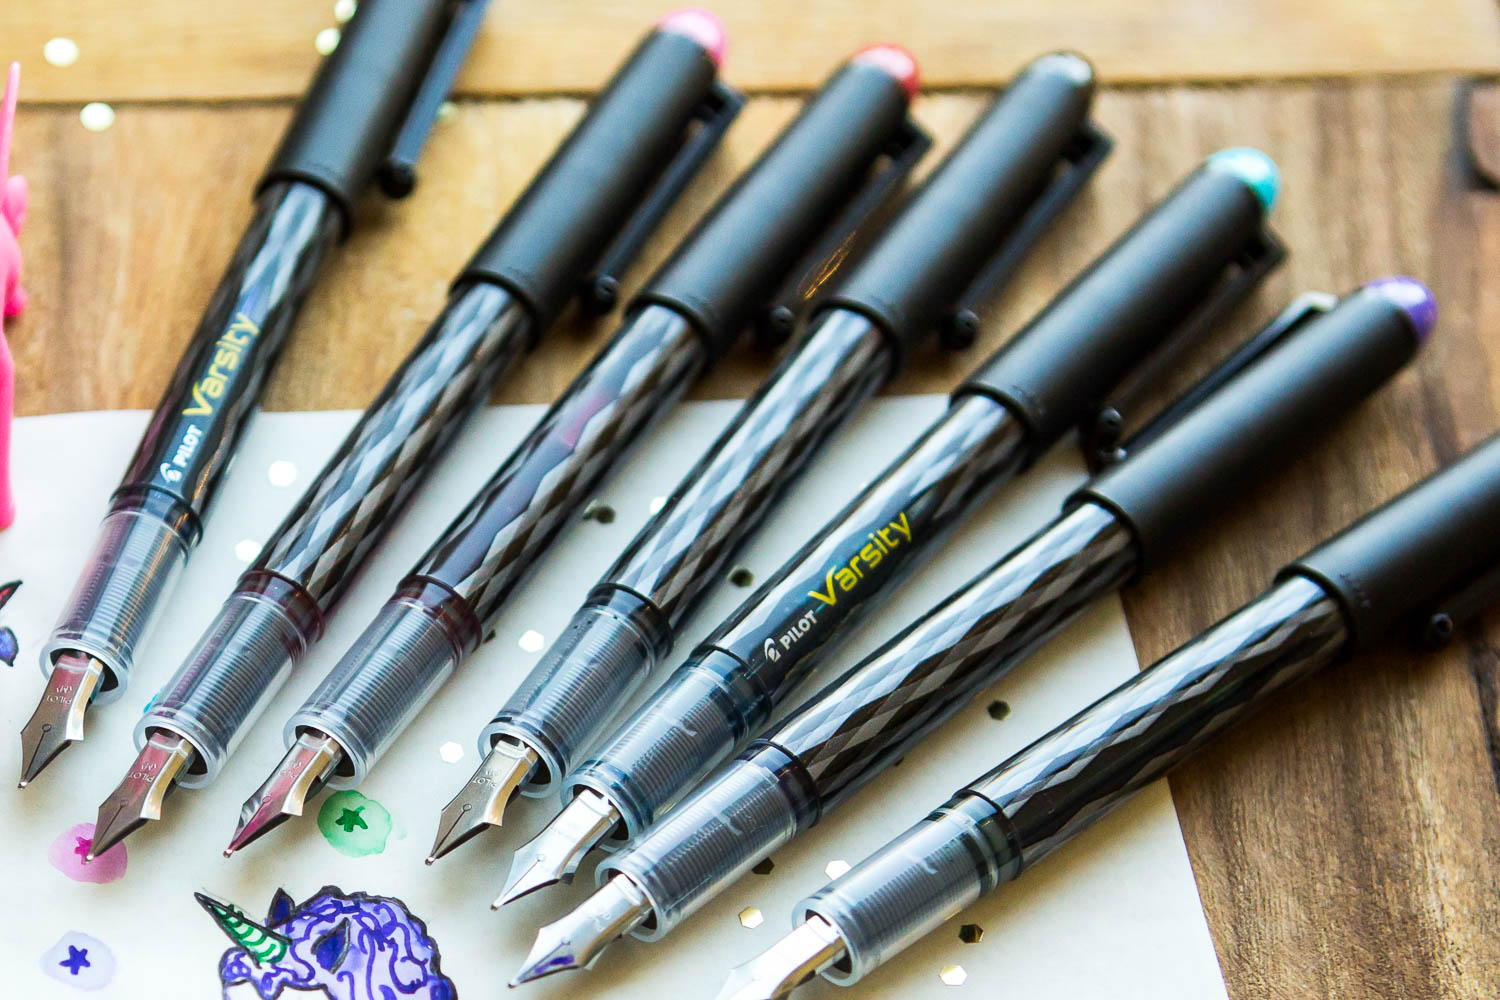 A look at the Pilot V disposable fountain pen and how to refill one.